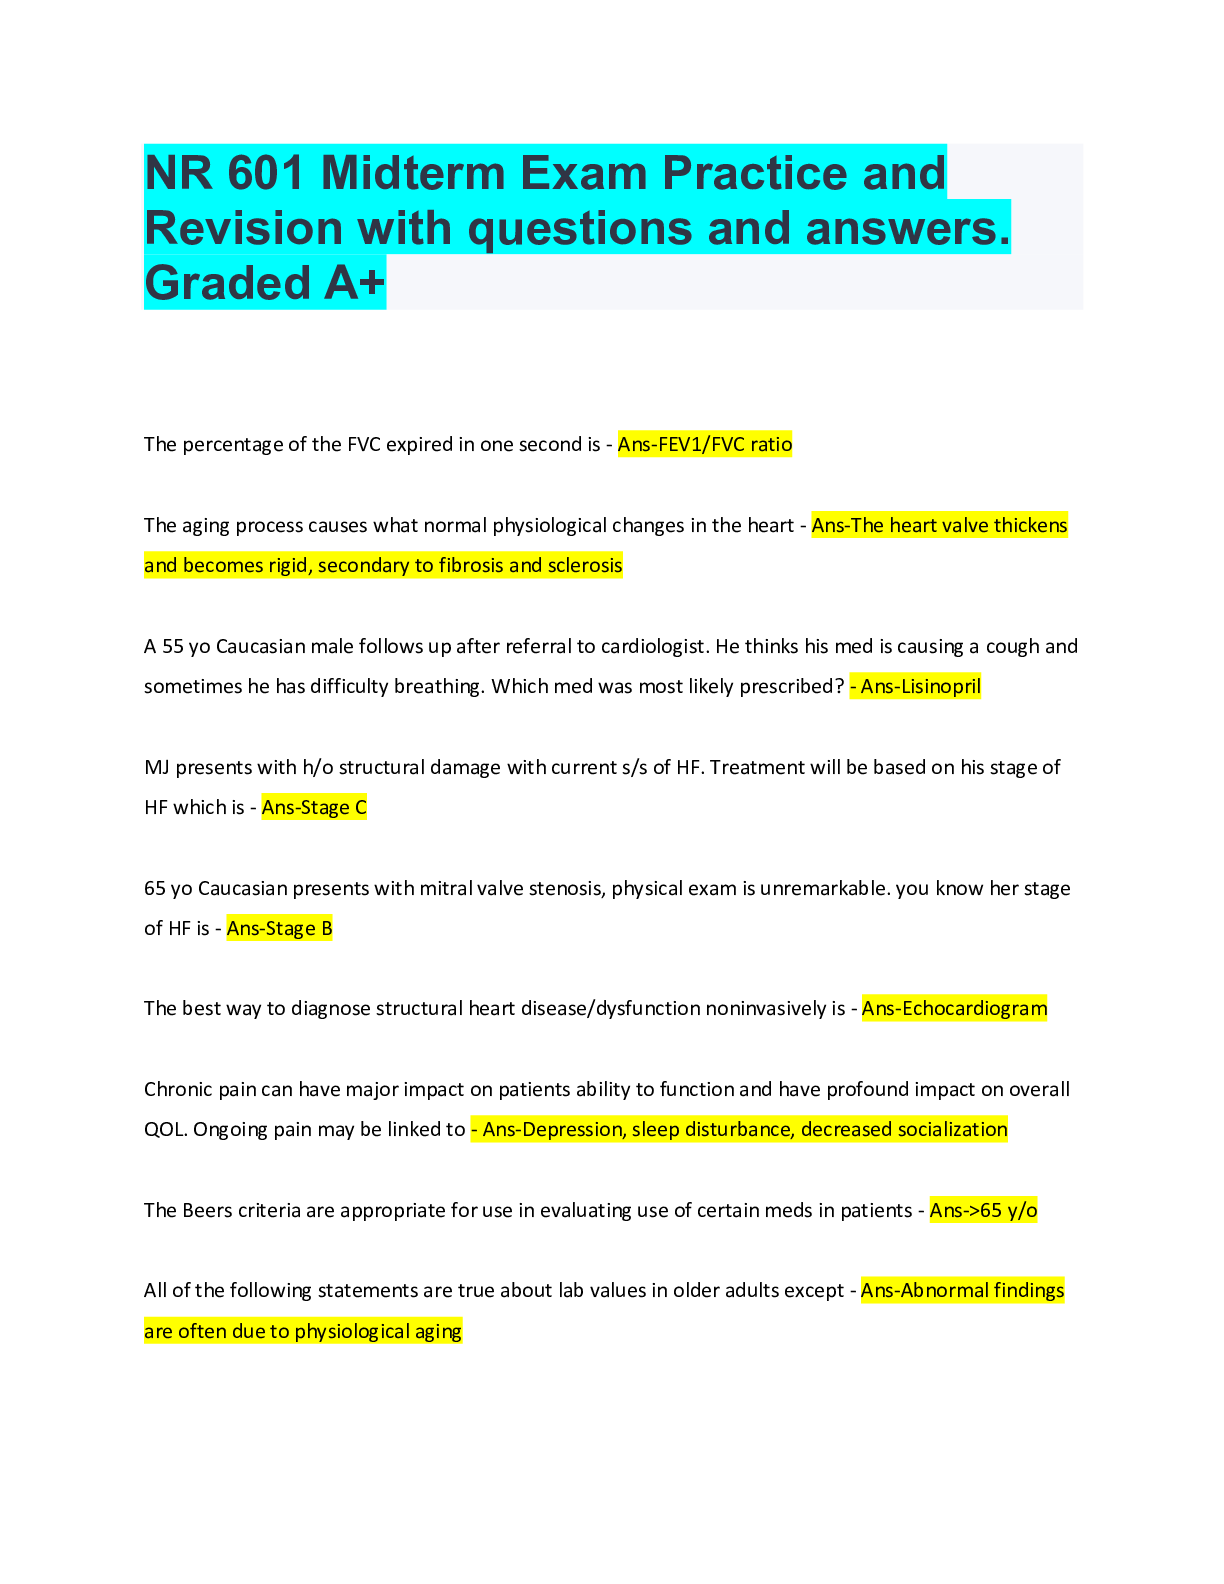 NR 601 Midterm Exam Practice and Revision with questions and answers